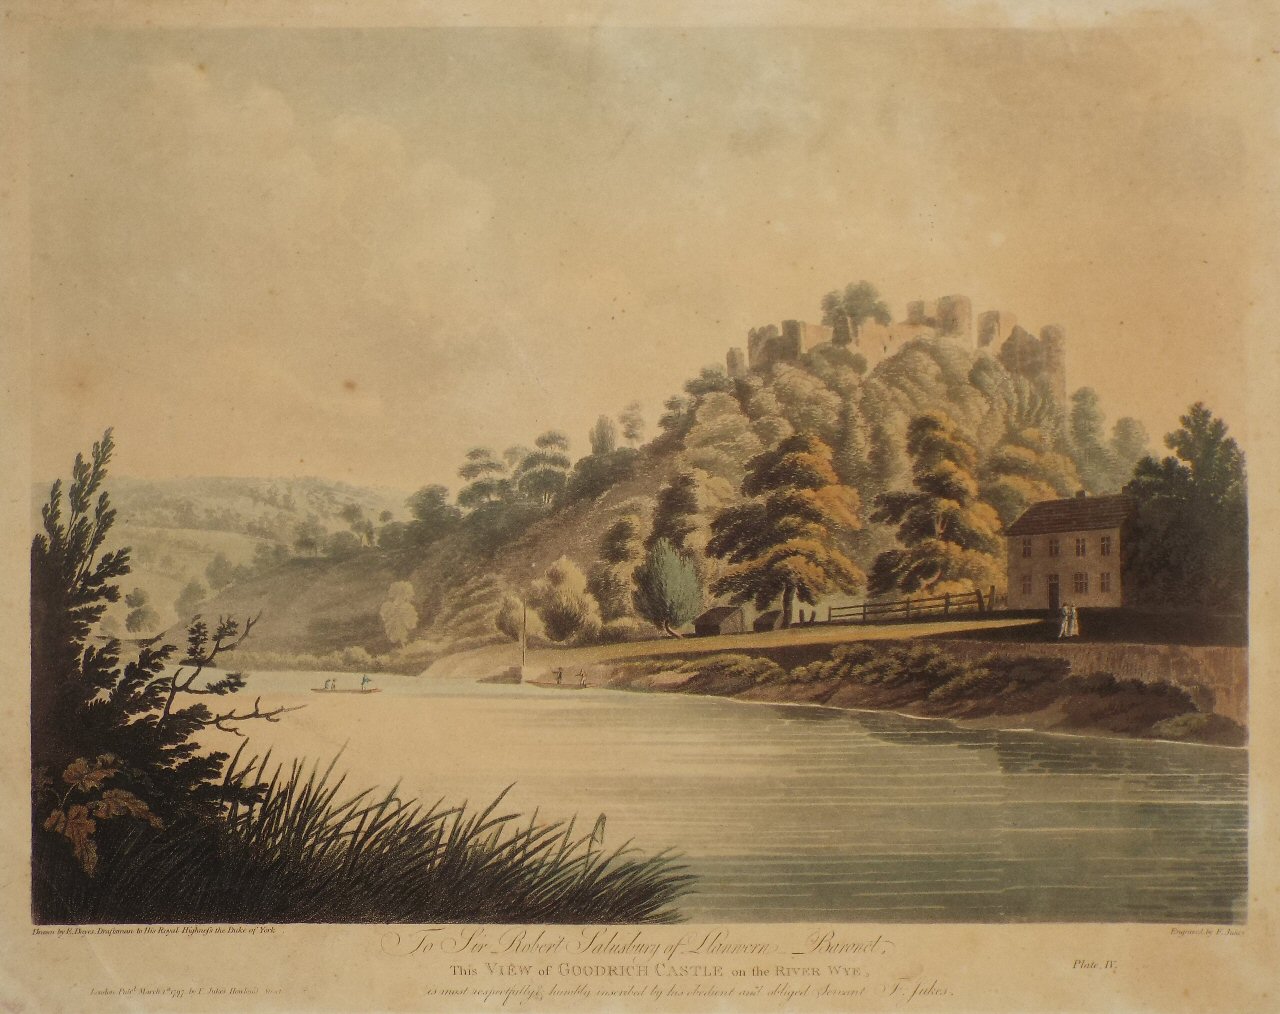 Aquatint - To Sir Robert Salusbury of Llanwern Baronet This View of Goodrich Castle on the River Wye - Jukes